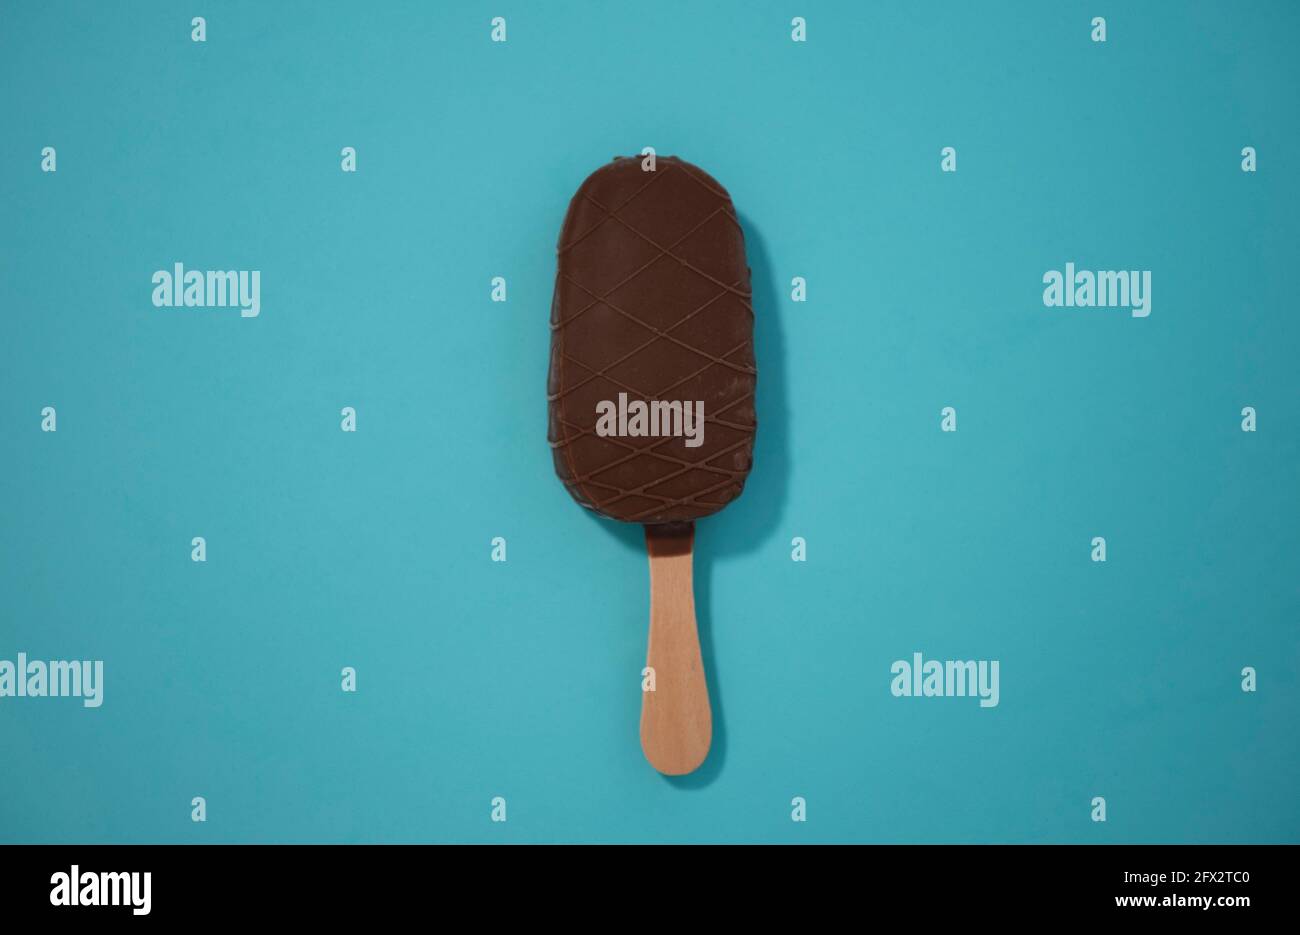 Novelty ice cream treat shot on solid colorful background. Series 1 of 9. Stock Photo